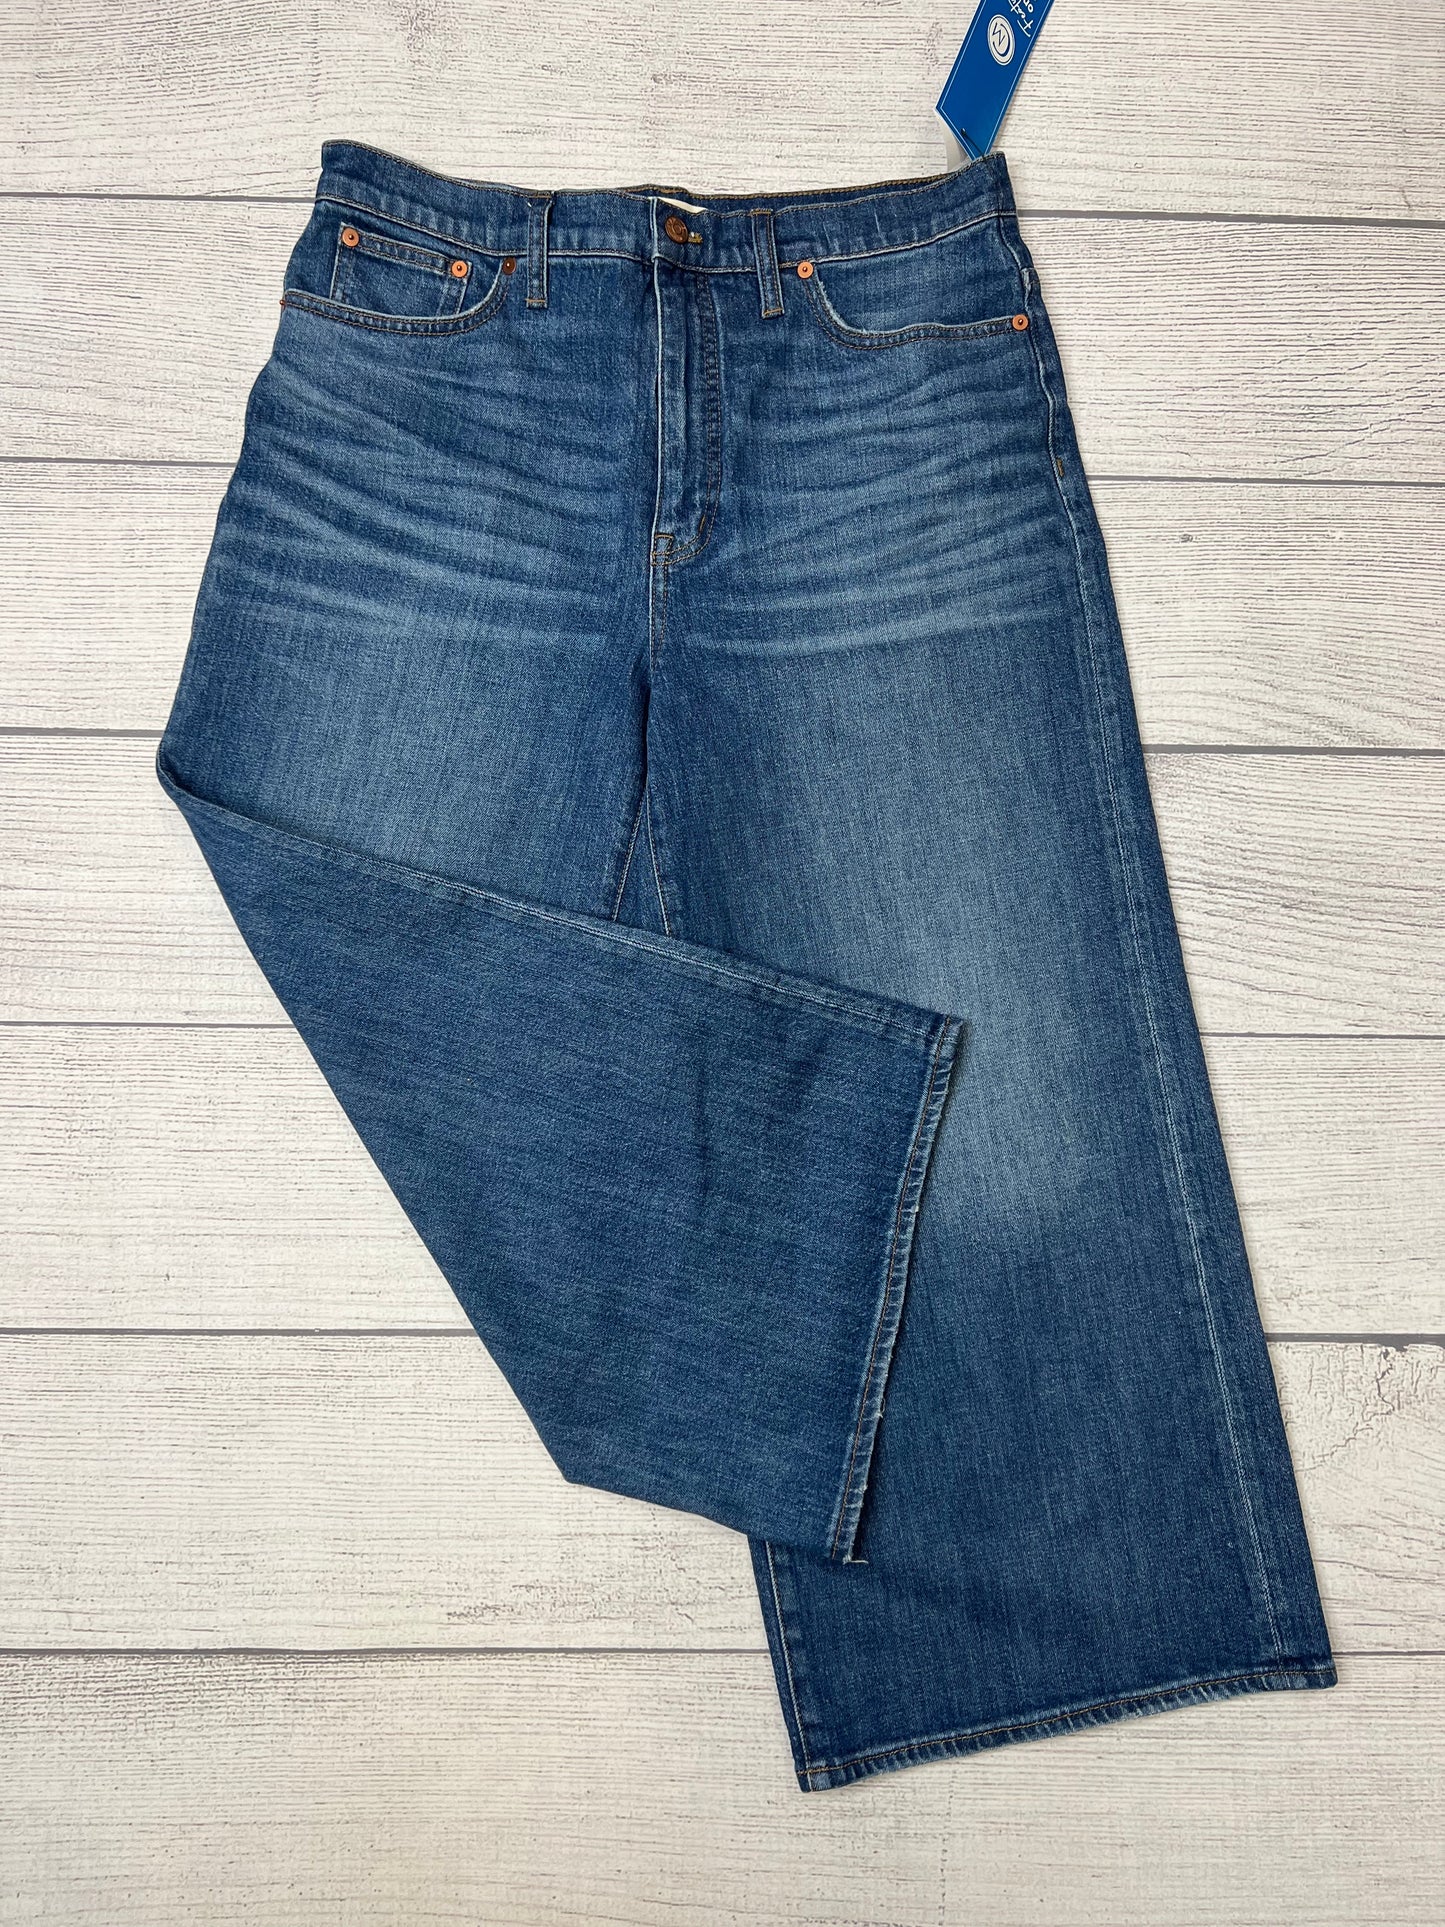 Wide Leg Crop Jeans By Madewell  Size: 12 / 31